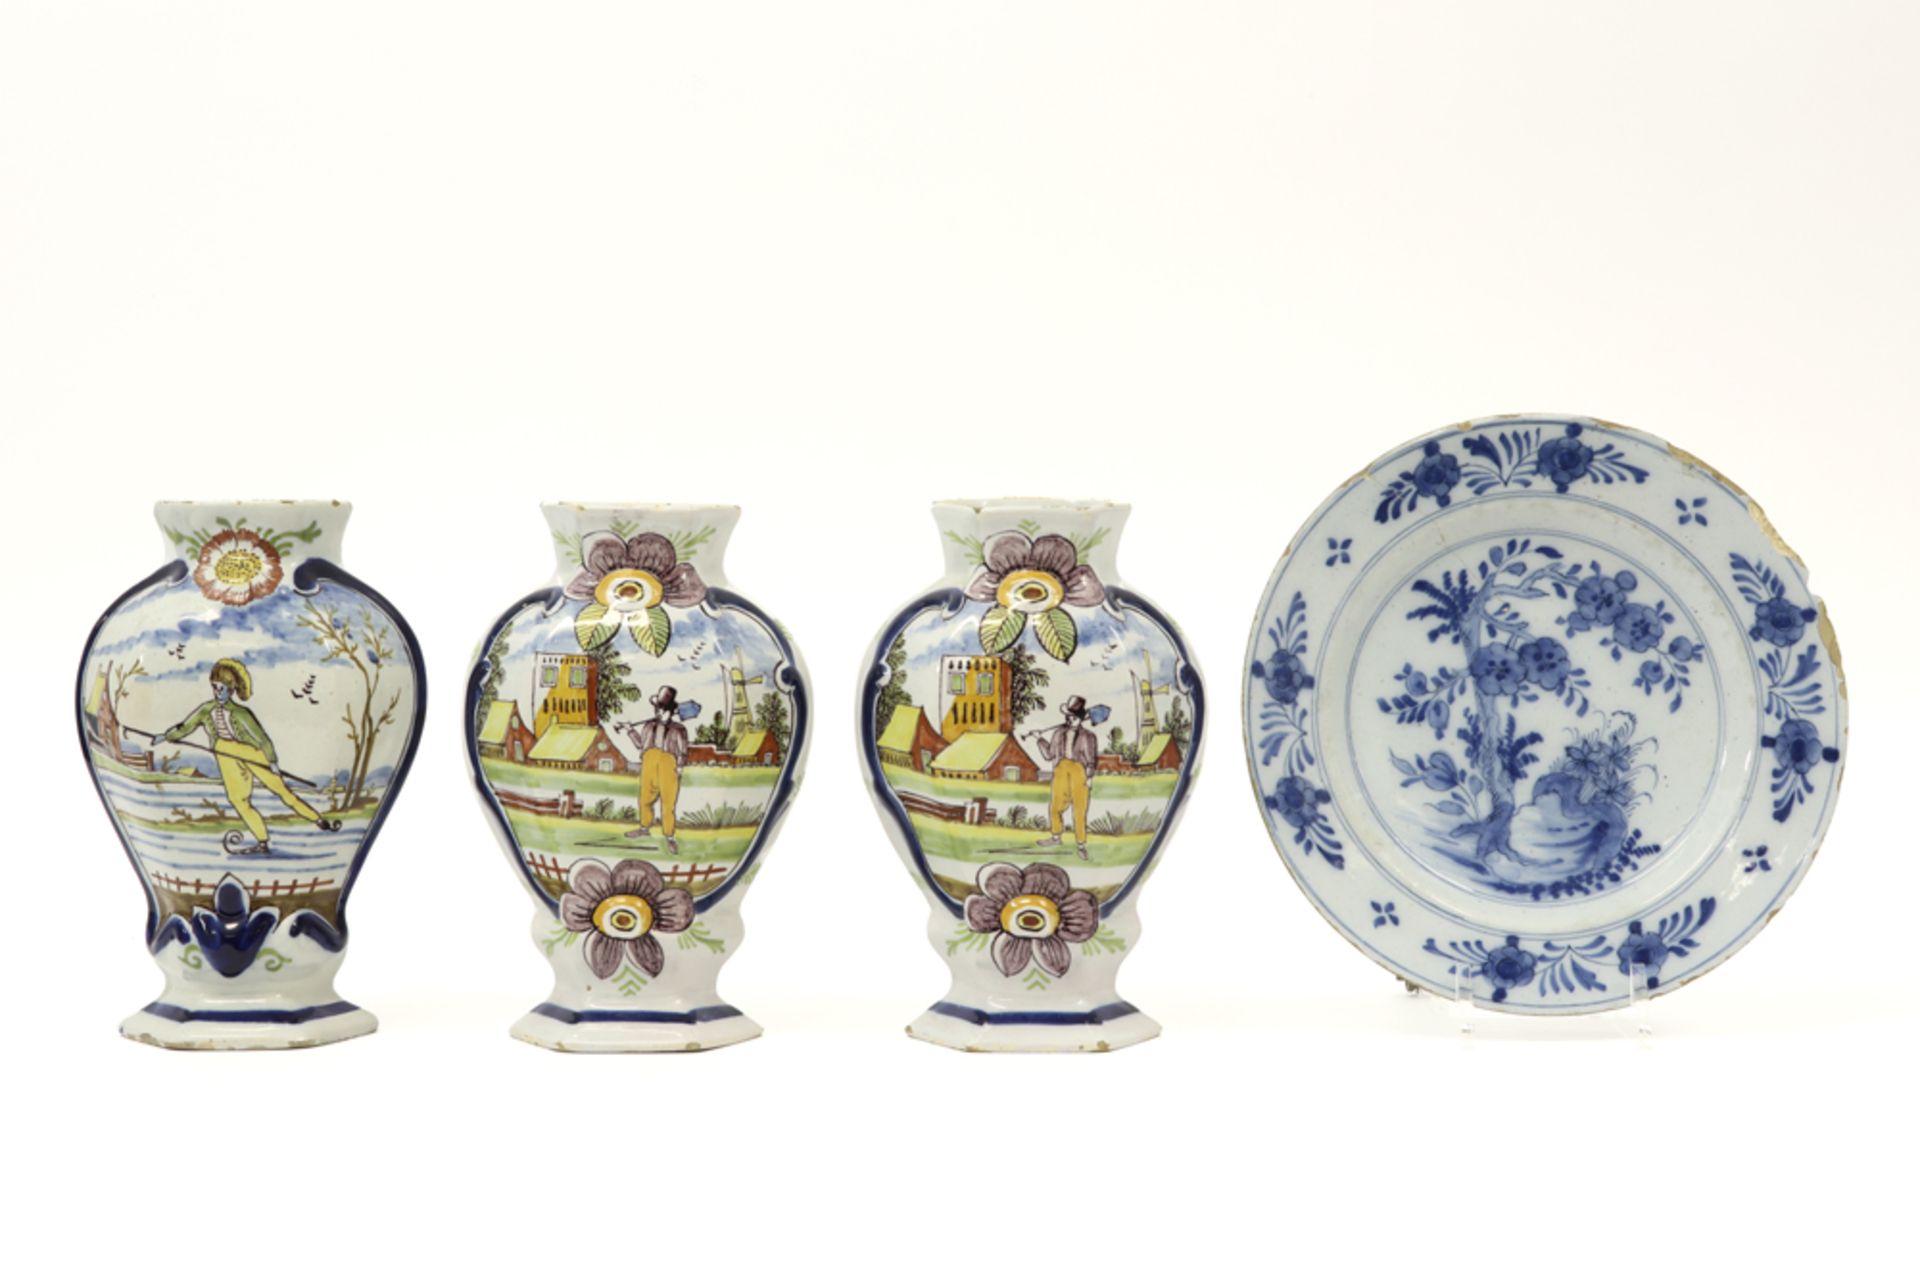 three 18th Cent. vases in marked ceramic from Delft and small plate with a blue-white decor ||